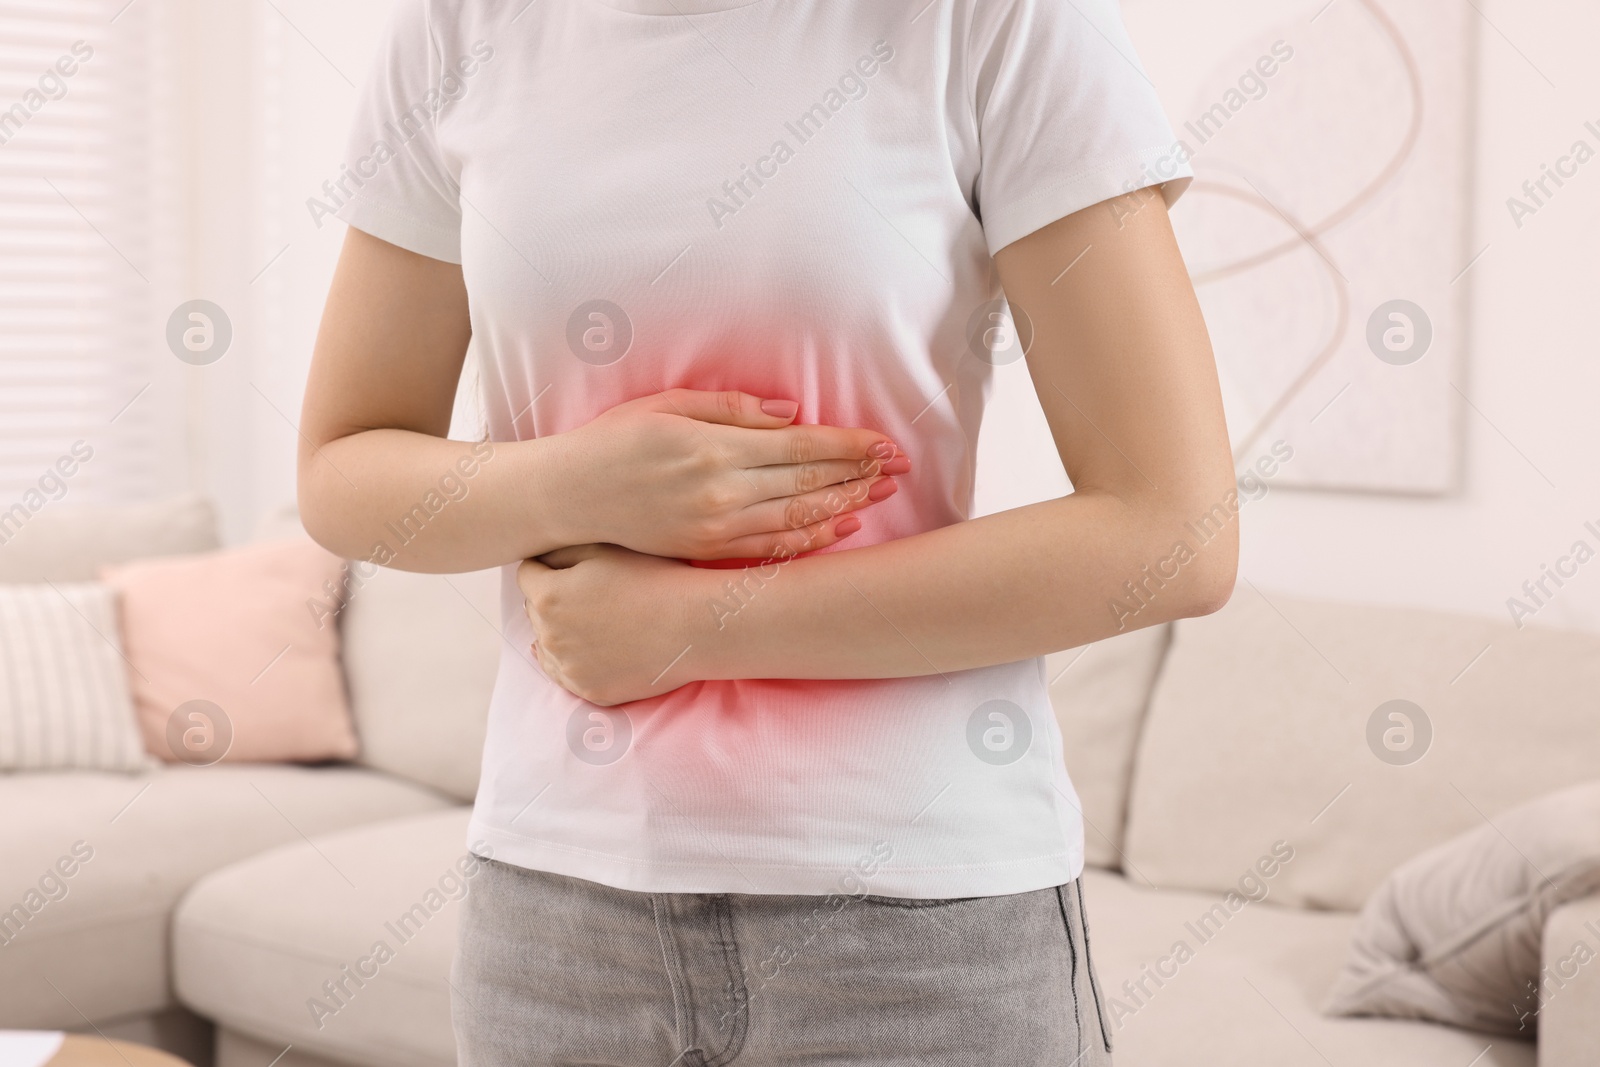 Image of Woman suffering from abdominal pain at home, closeup